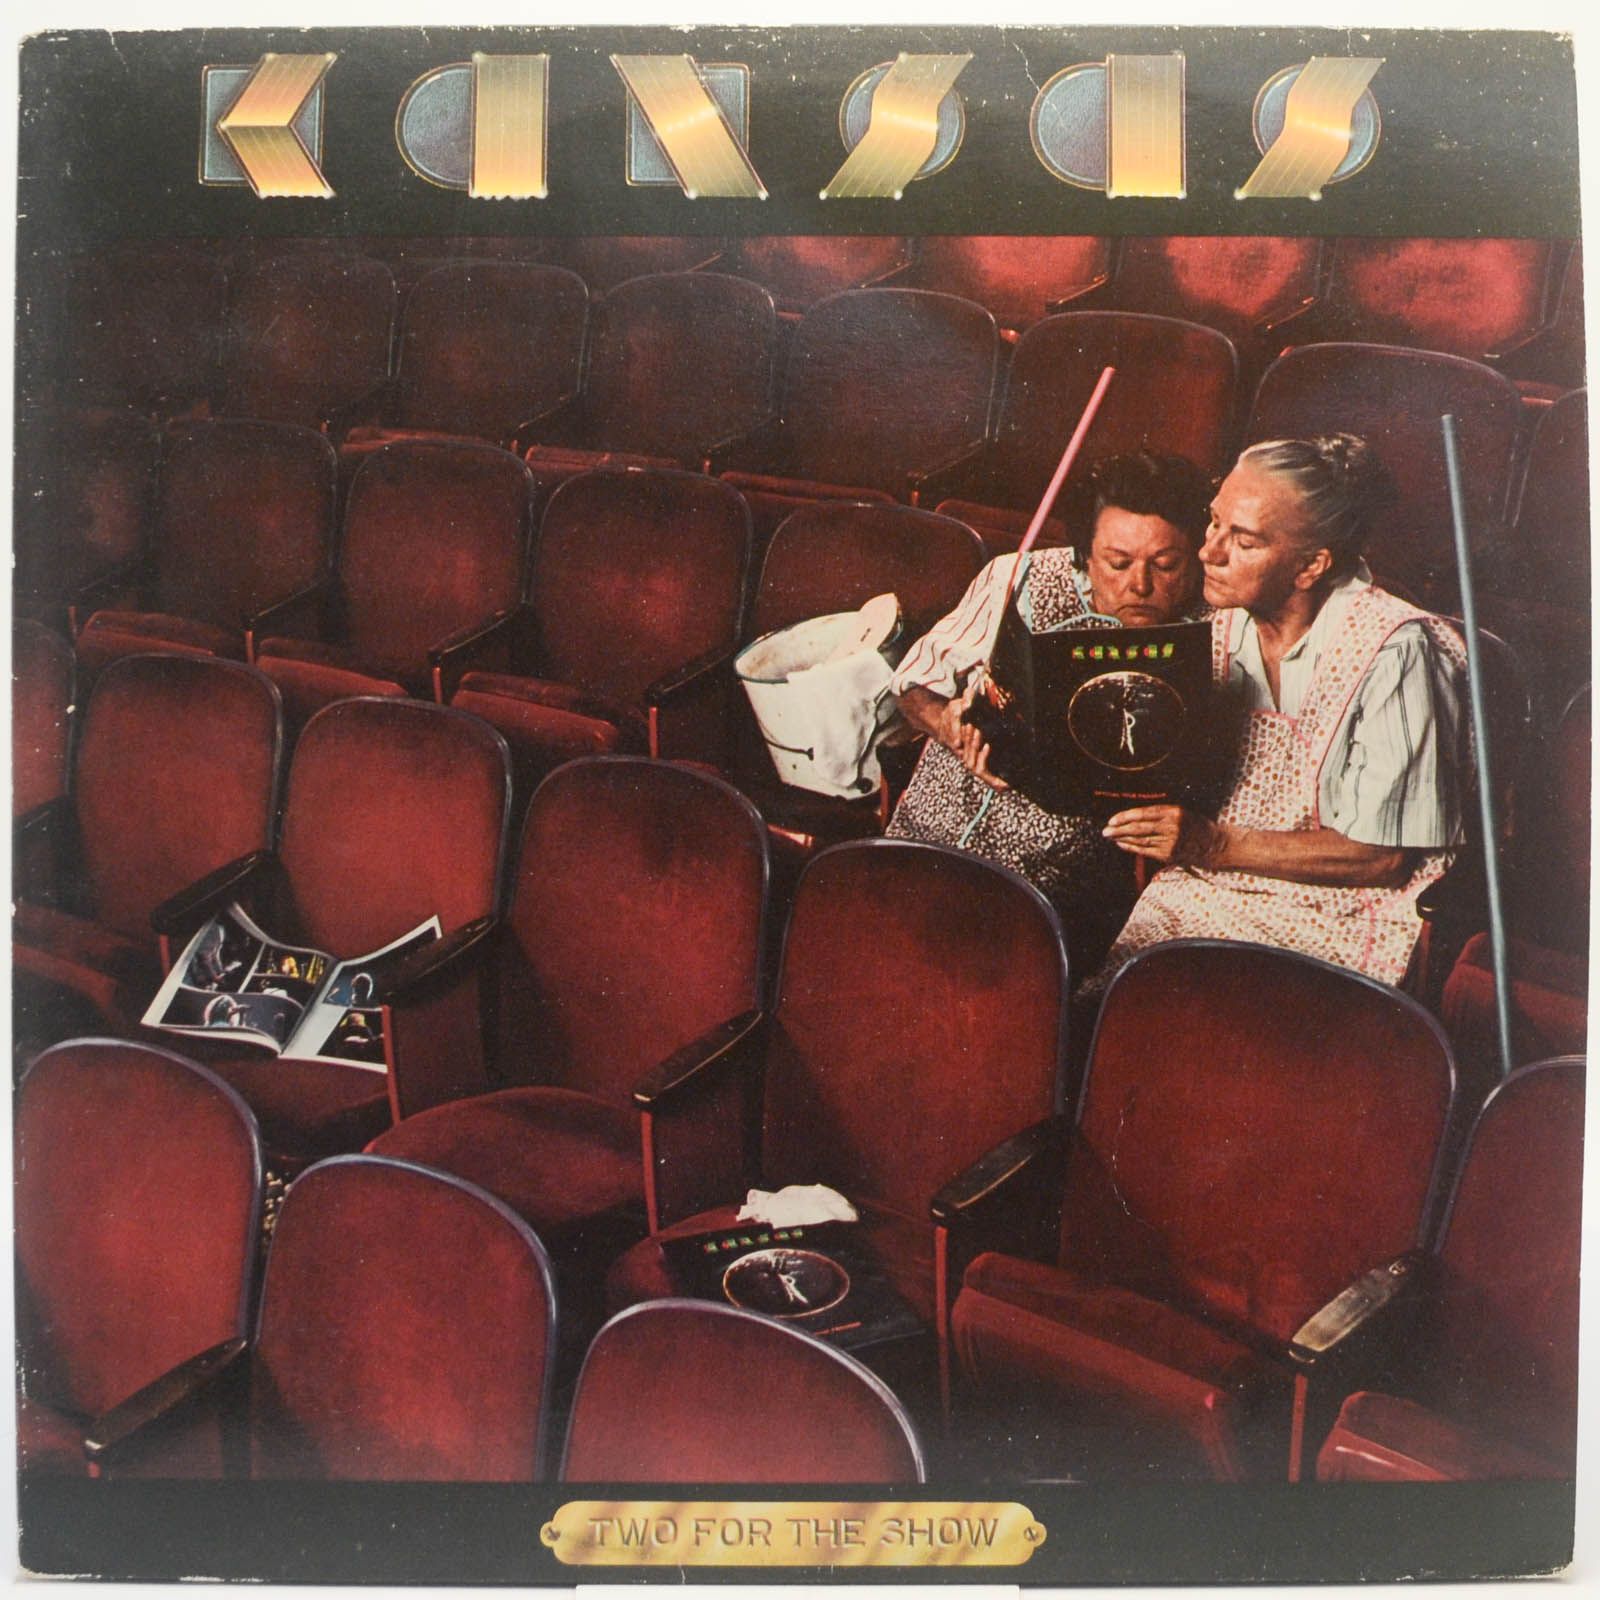 Kansas — Two For The Show (2LP), 1978